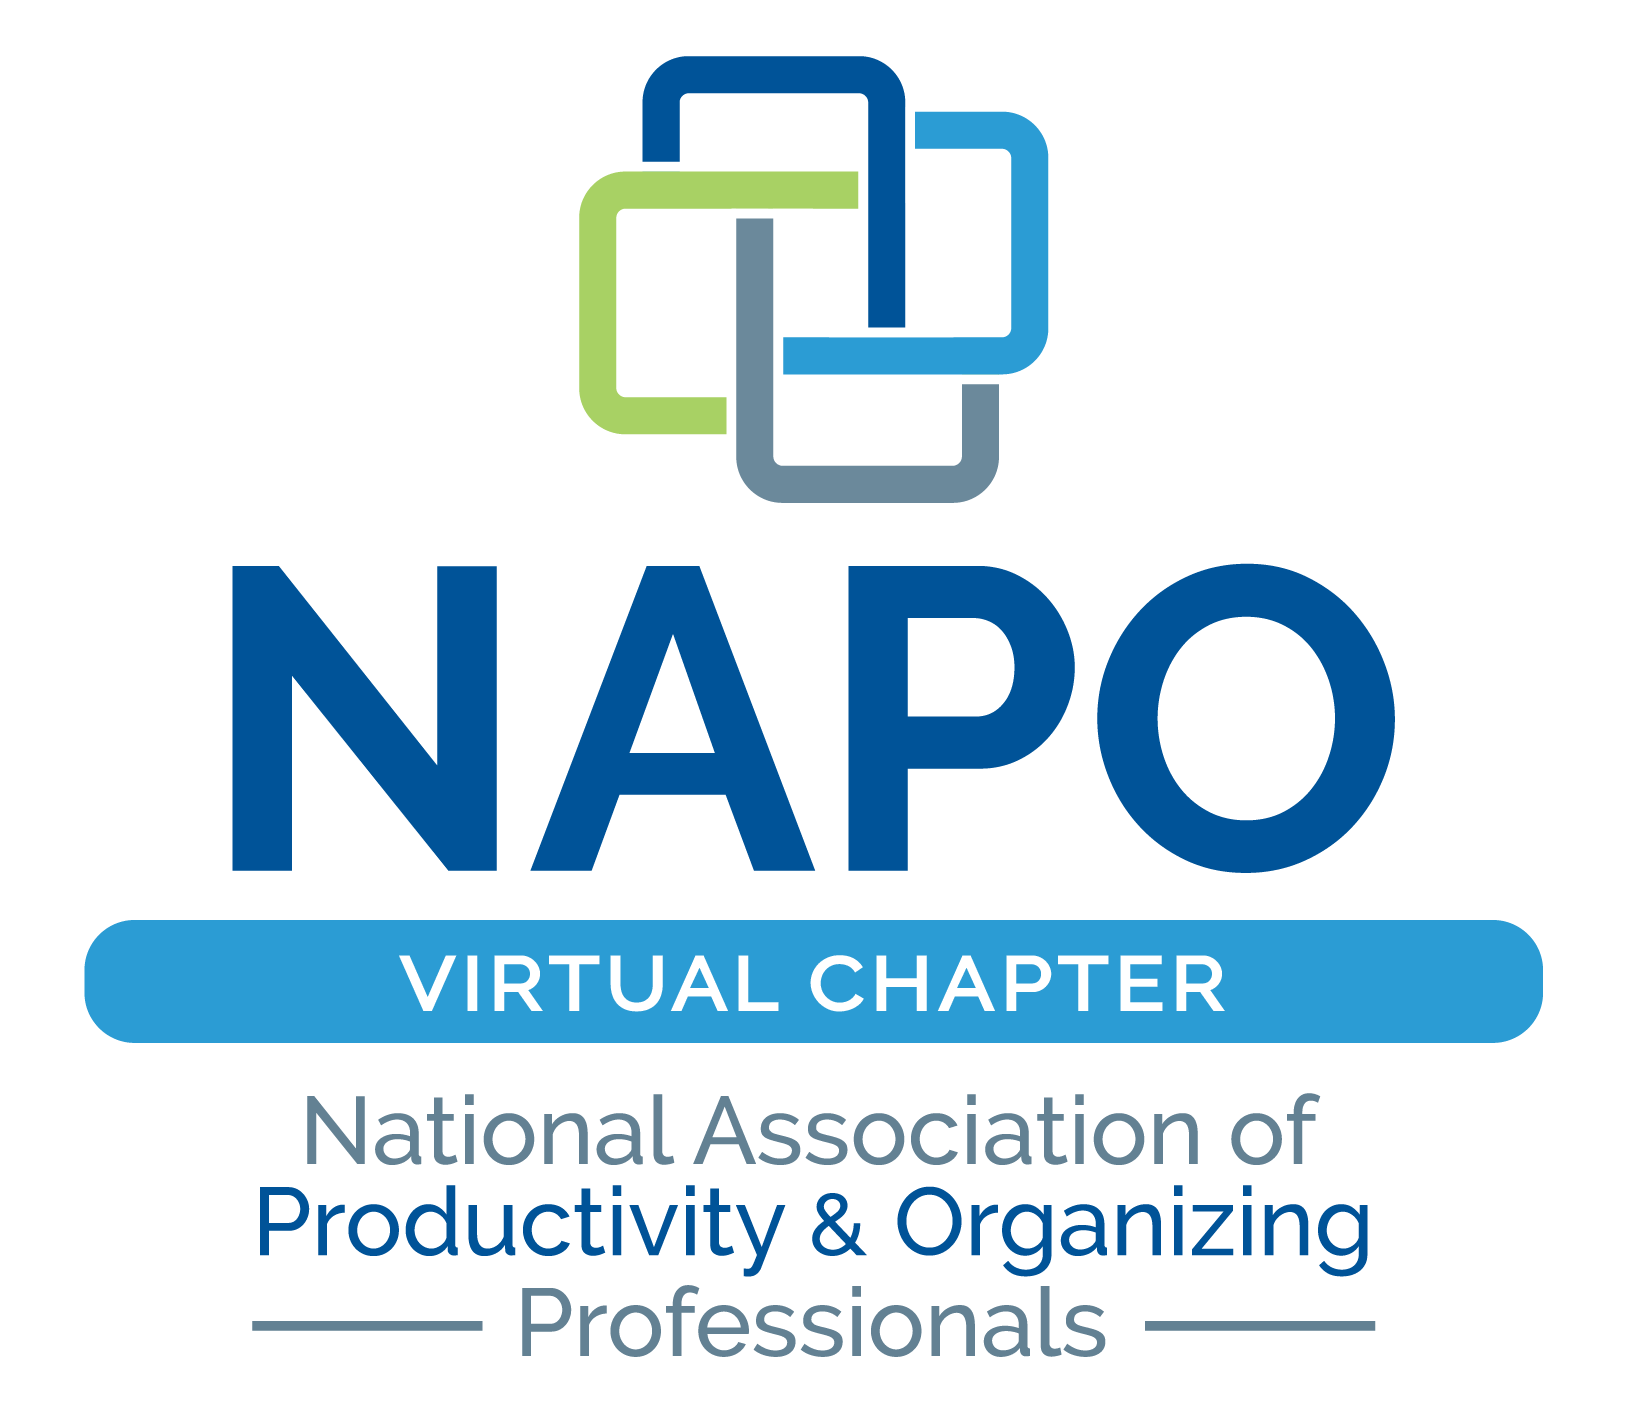 NAPO-virtual-chapter-01.png